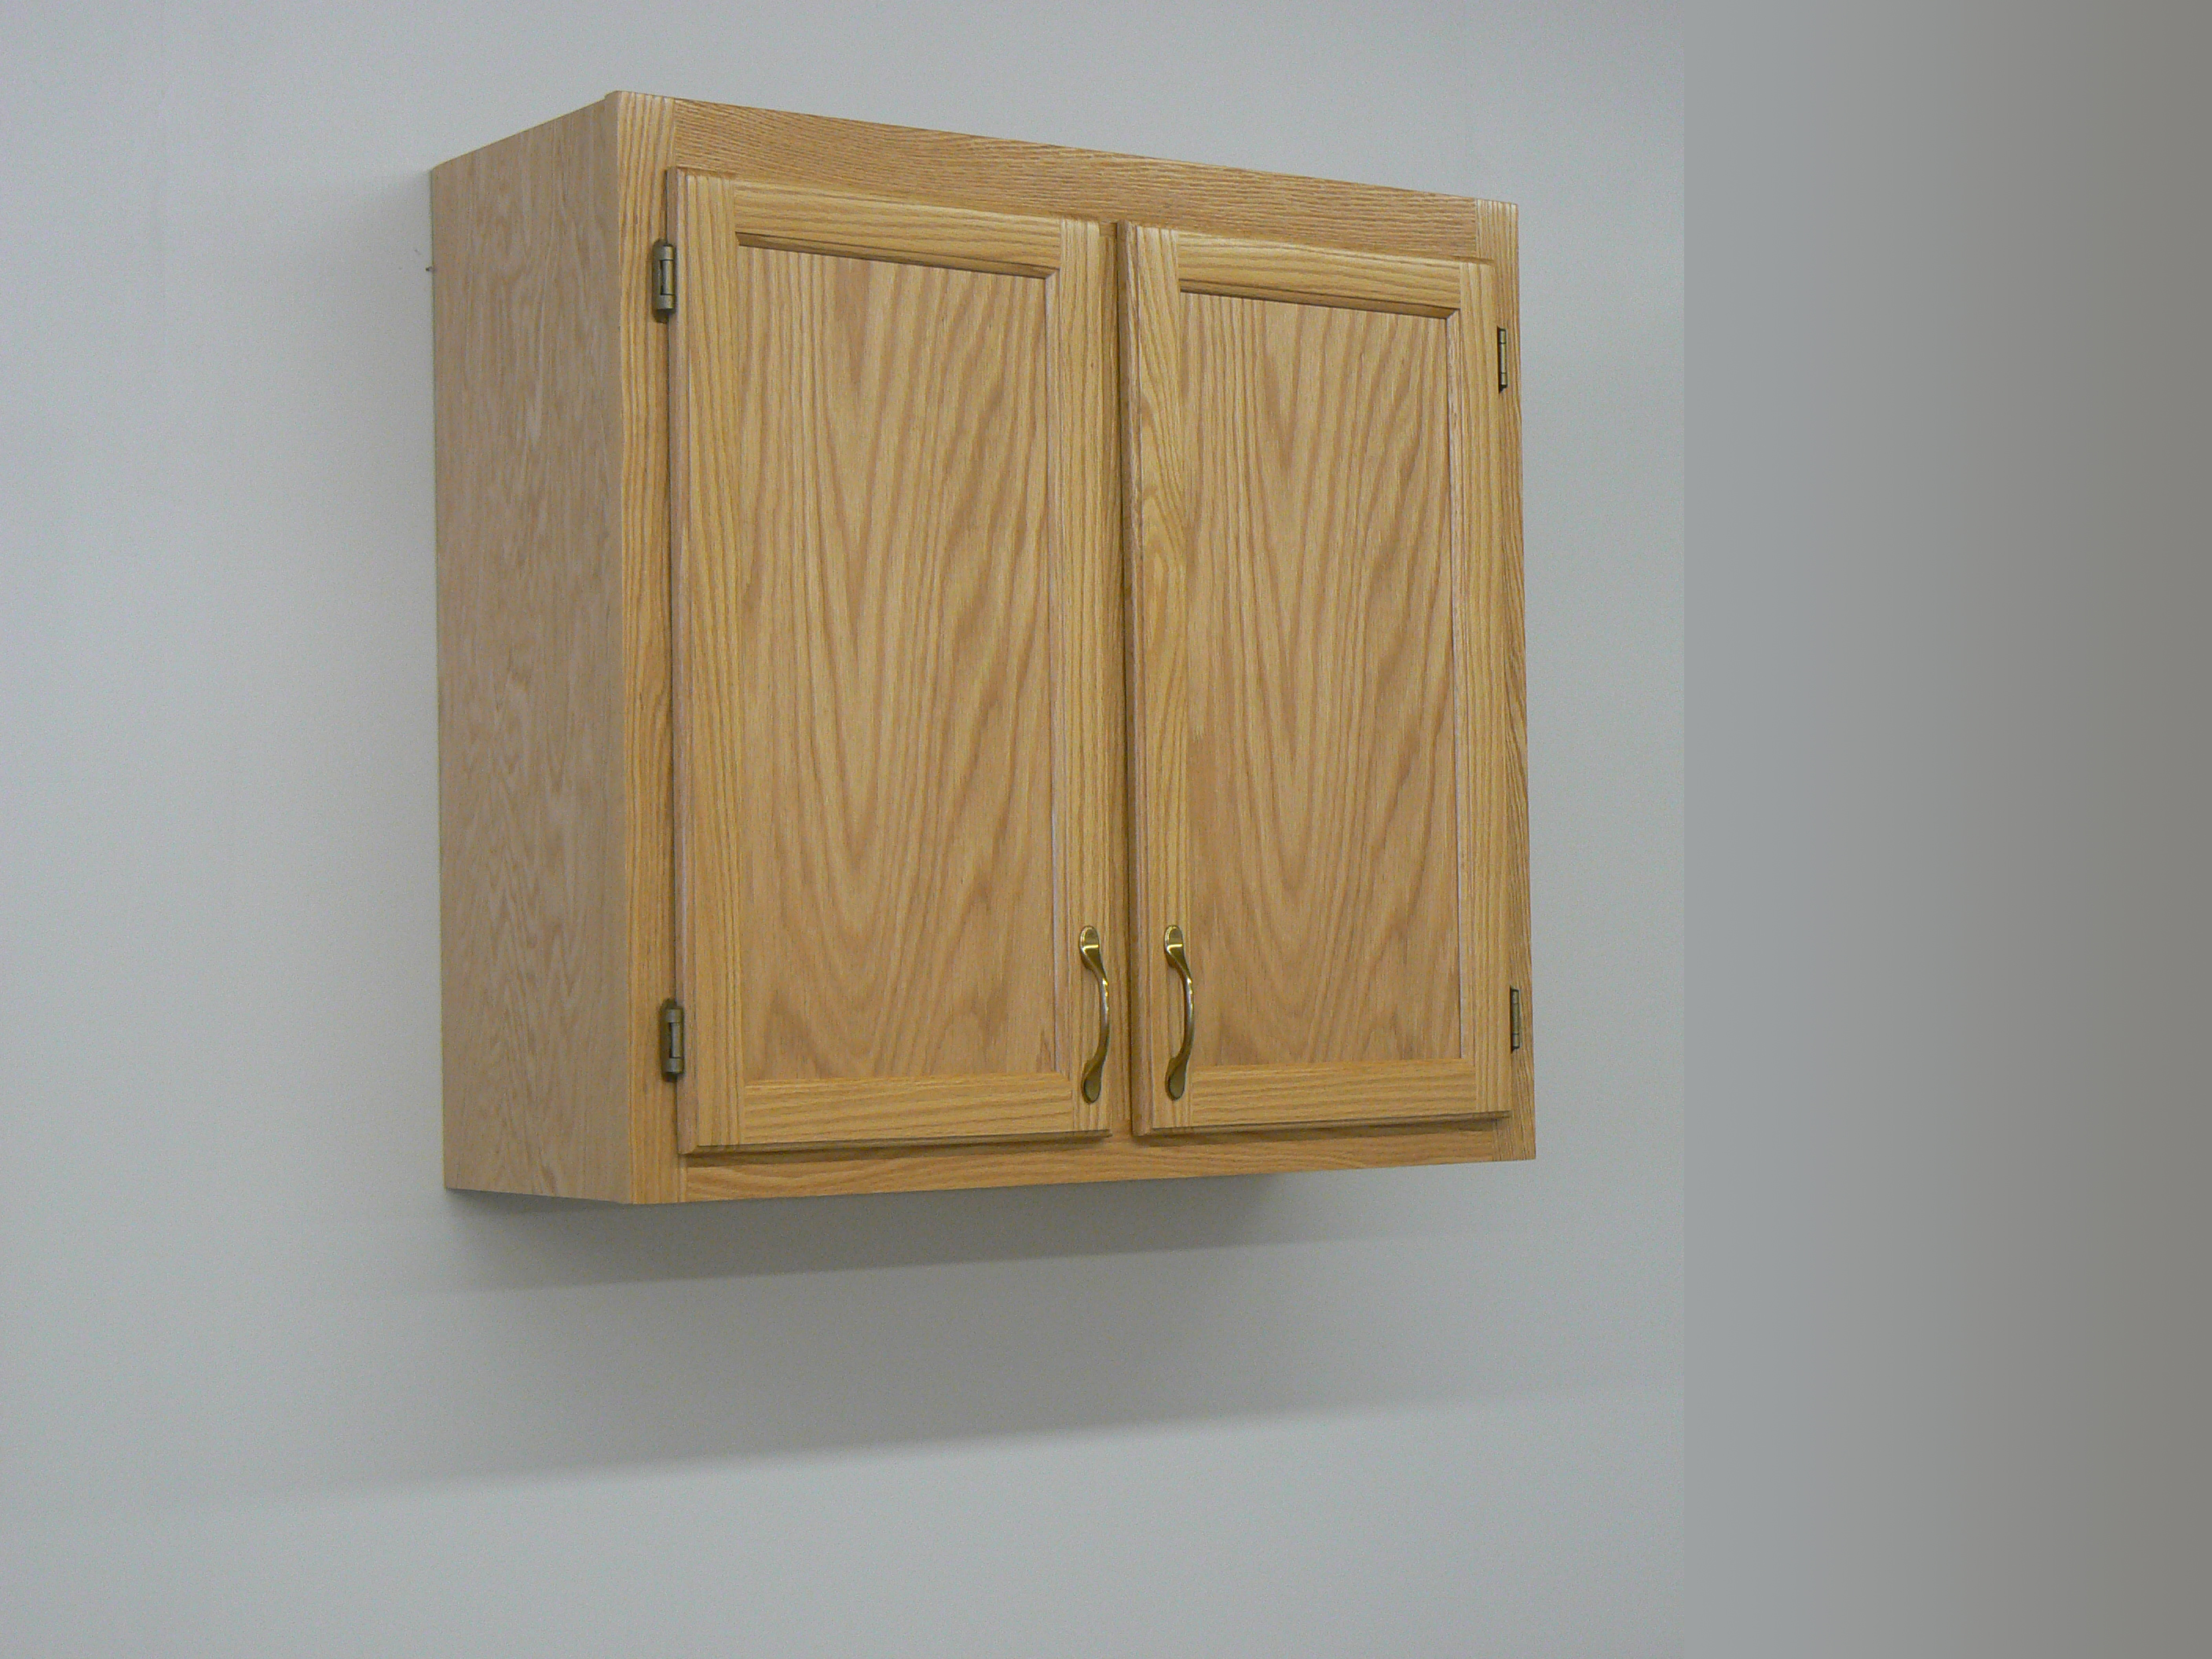 An example of a 30 x 31.75 inch upper cabinet.